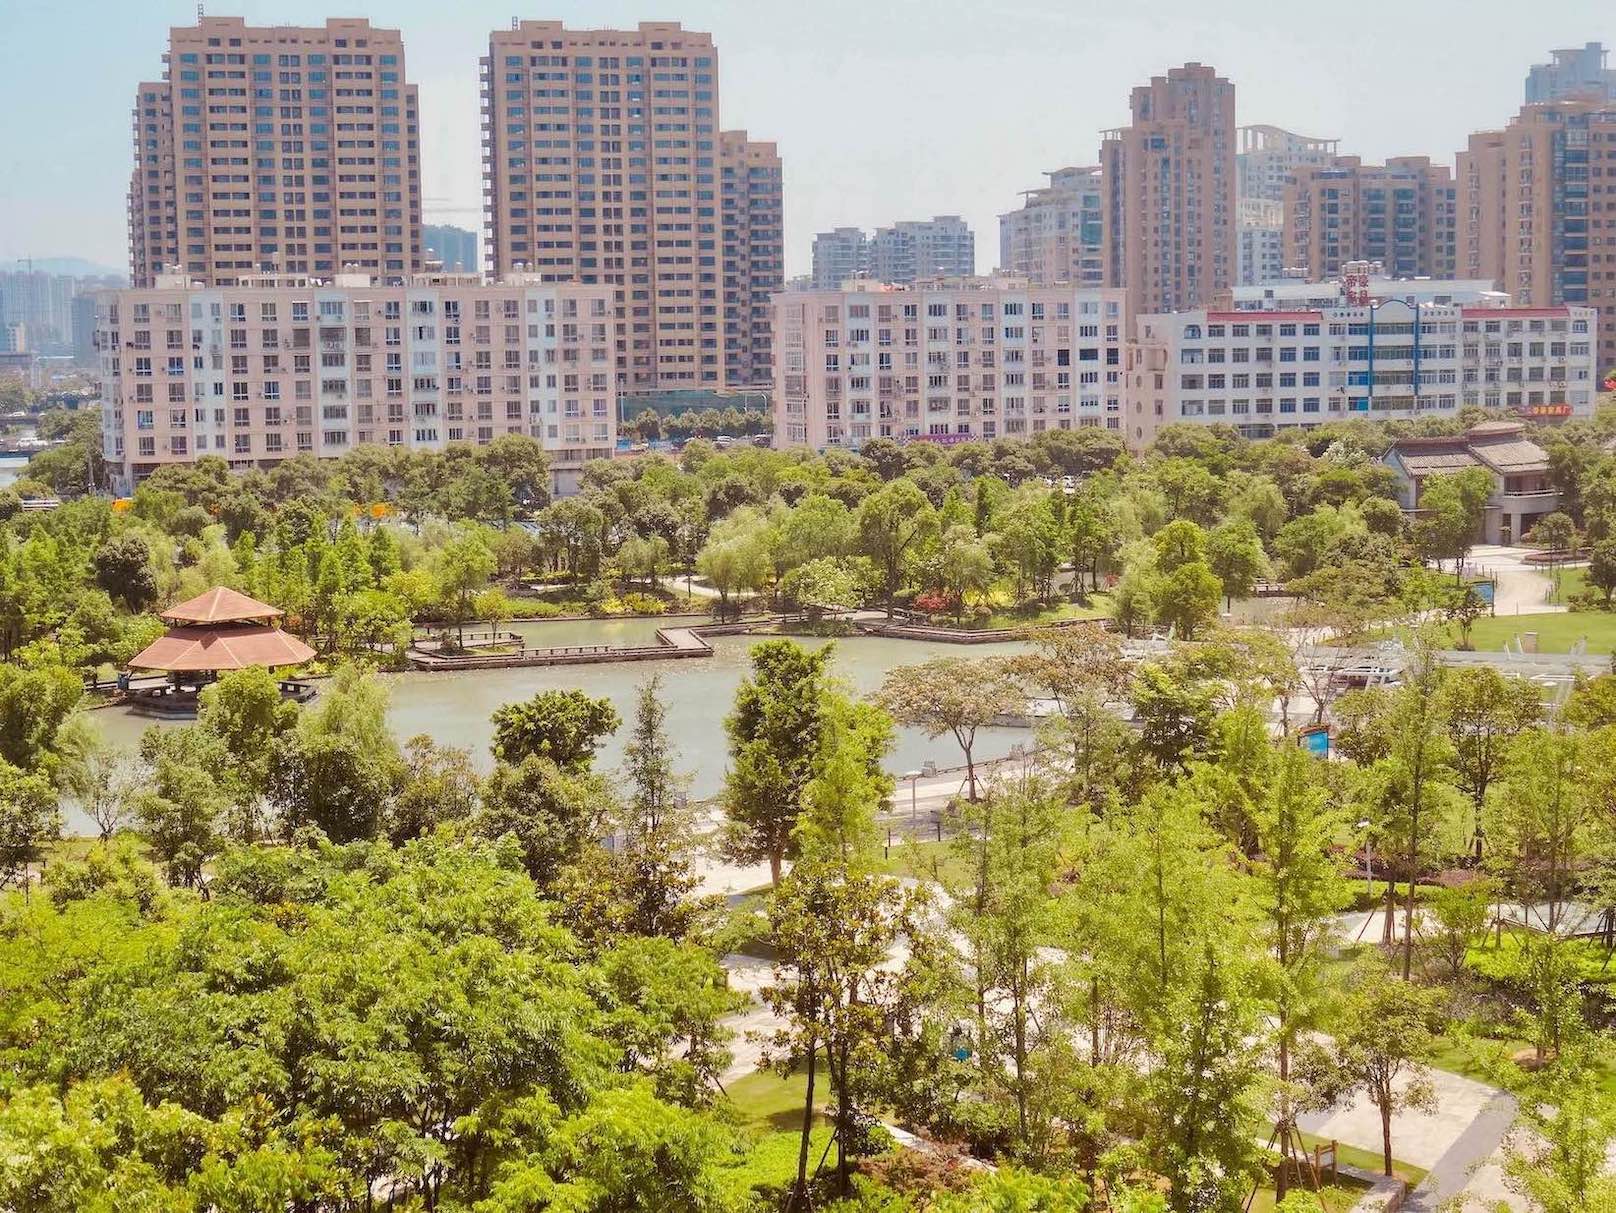 The Chinese city of Rui'an seen from Mingjing Park